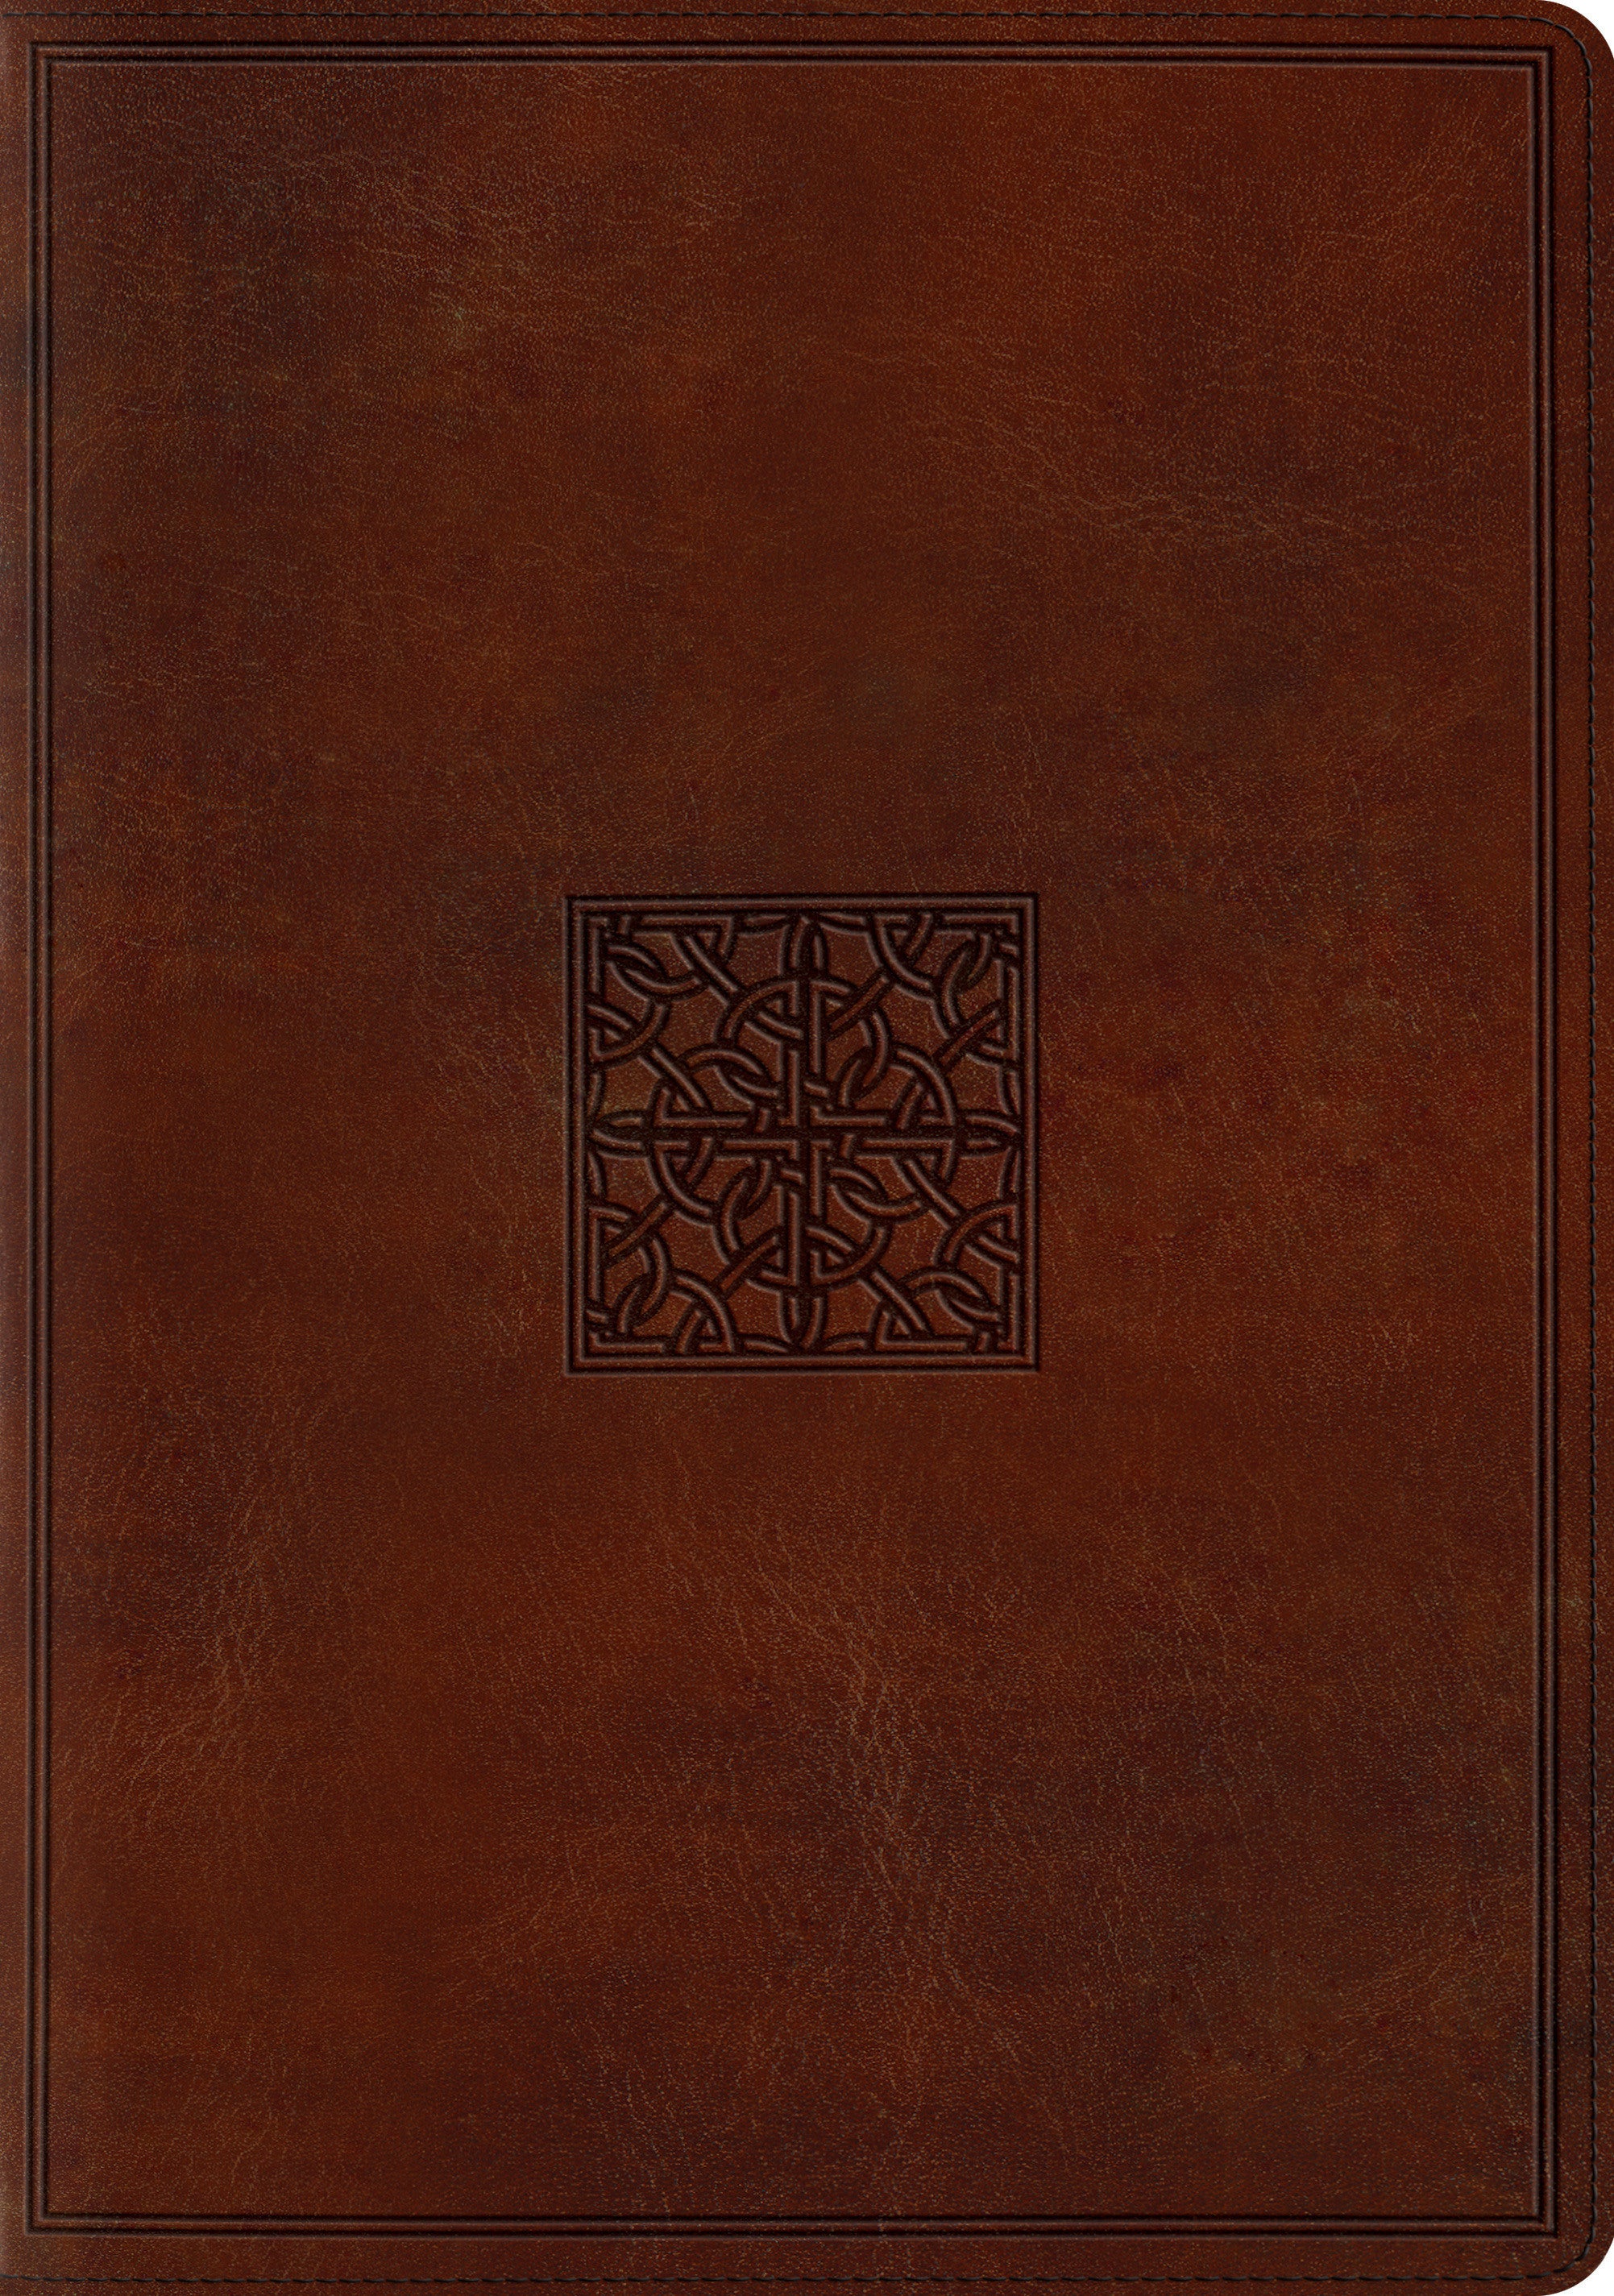 Image of ESV Study Bible, Imitation Leather, Illustrated, Maps, Study Guides, Articles, Concordance, other